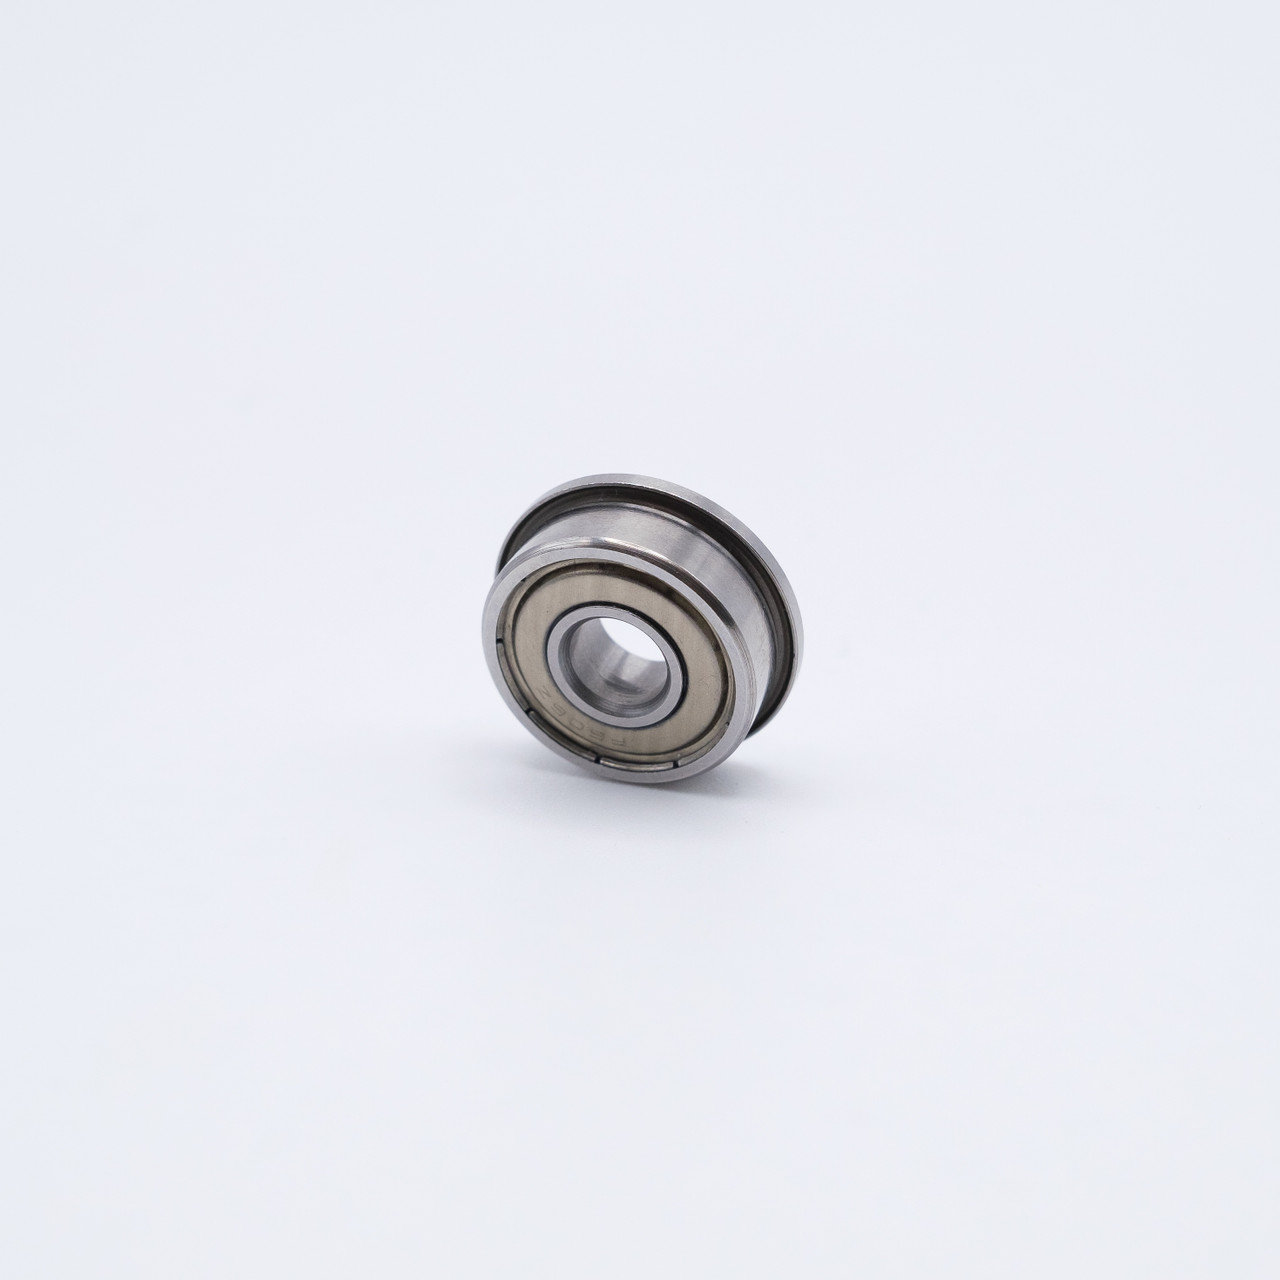 SF625-ZZ Stainless Steel Miniature Flanged Ball Bearing 5x16x5mm Front View